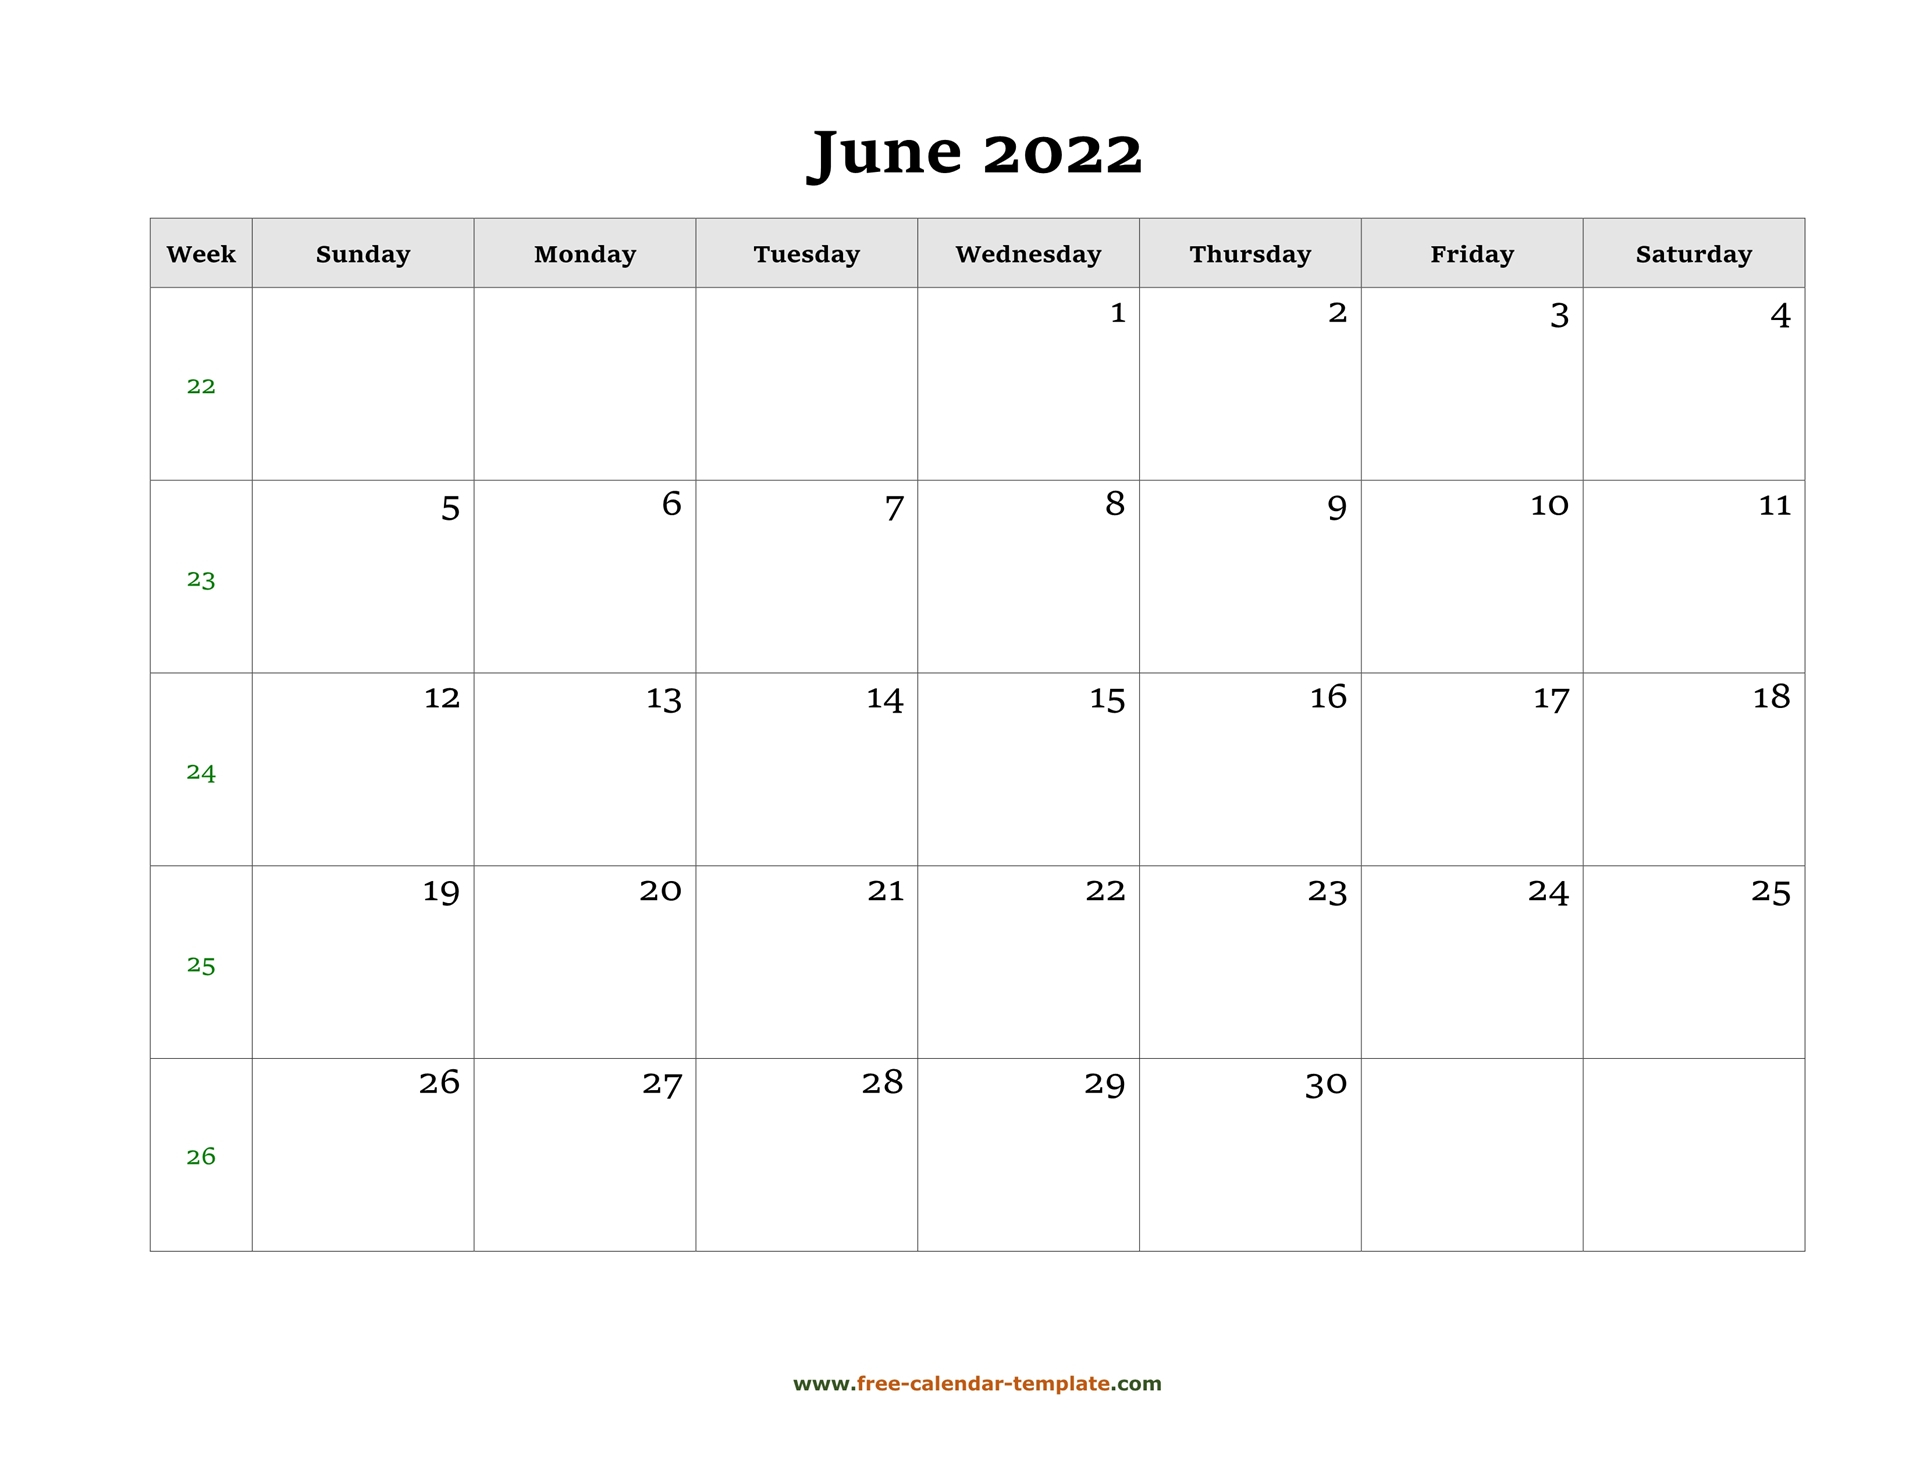 Take Calendar June 2022 With Holidays